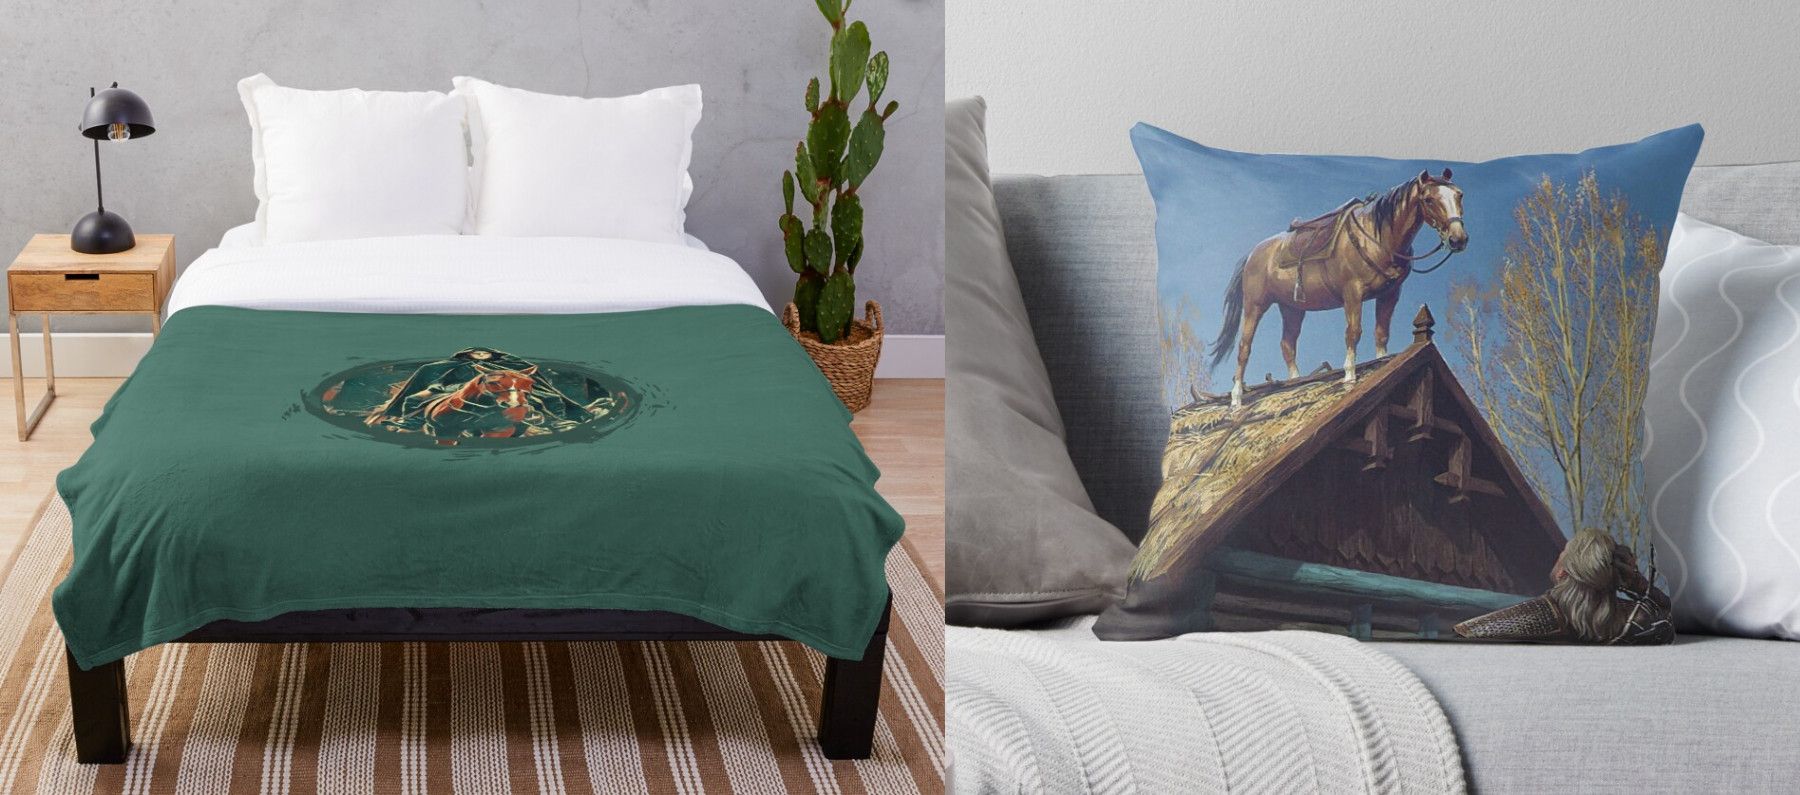 Roach-and-Rider-throw-blanket-pillow-the-witcher-3-netflix-redbubble-1